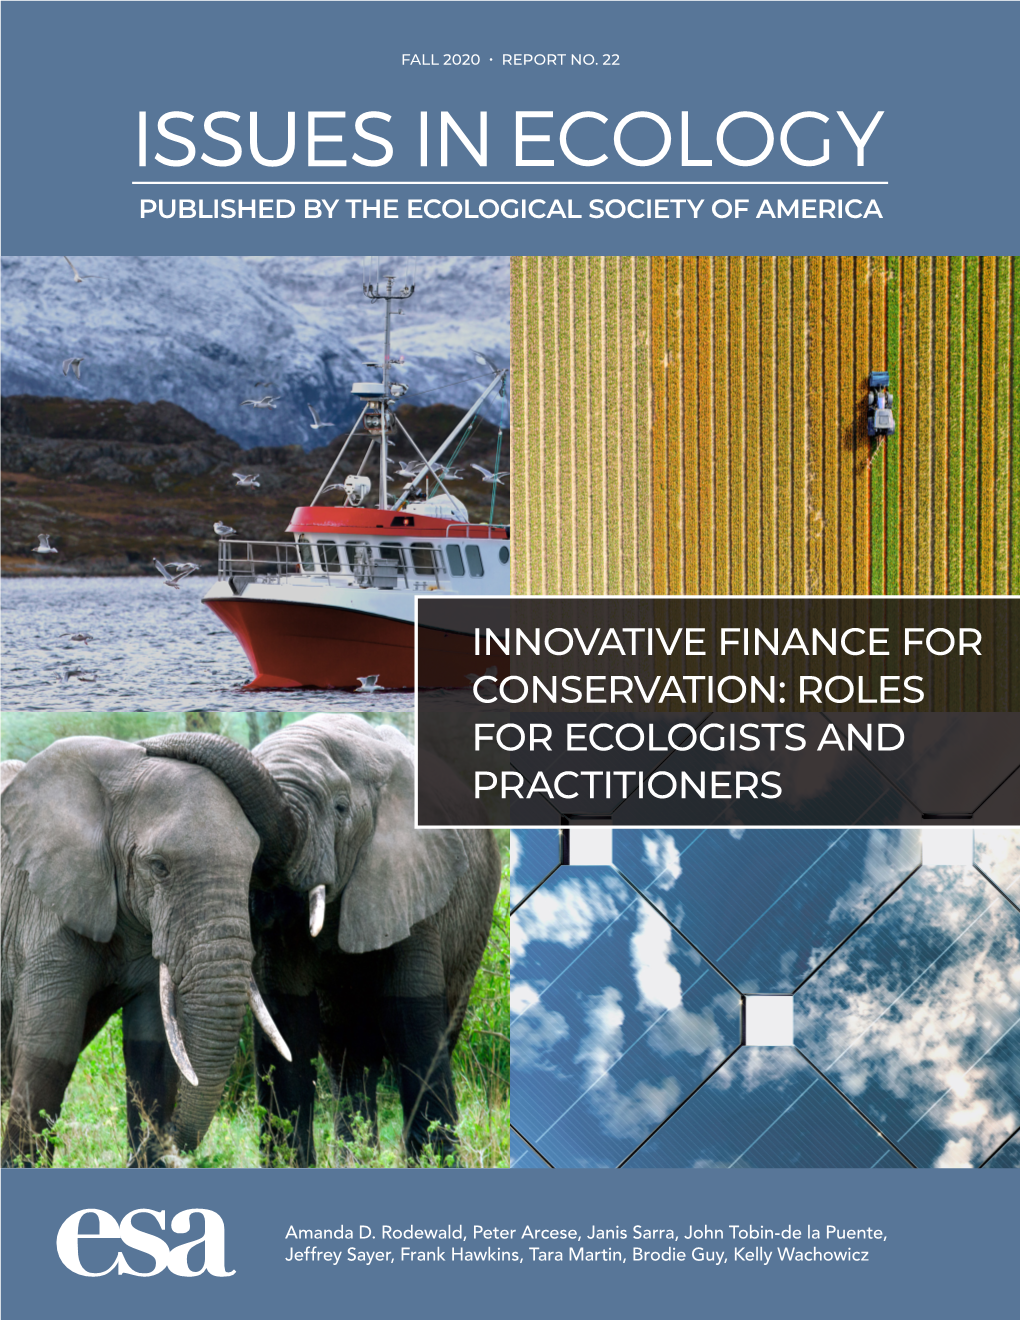 Innovative Finance for Conservation: Roles for Ecologists and Practitioners